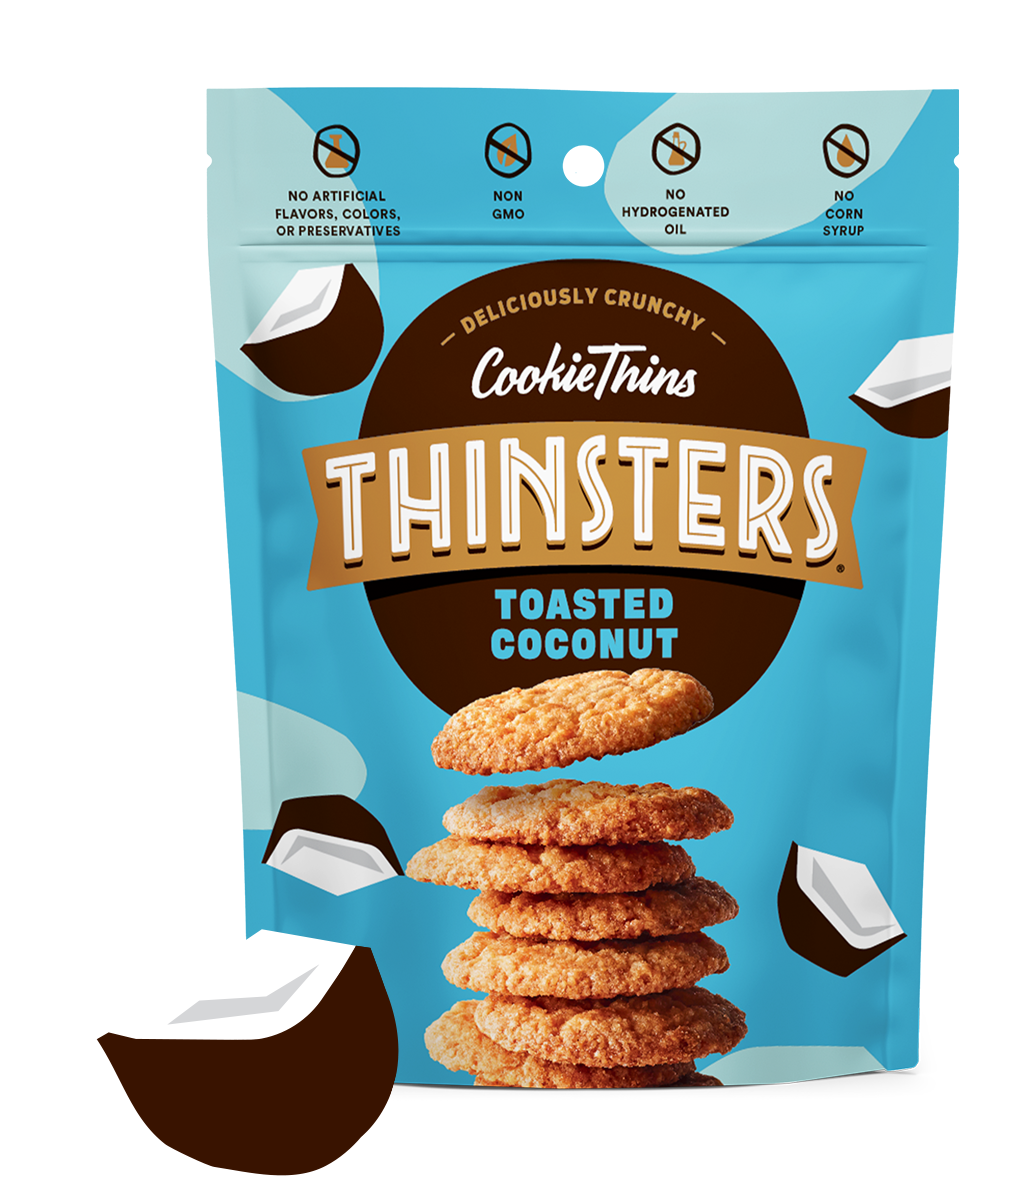 Thinsters Toasted Coconut, 4 oz (6 pack)